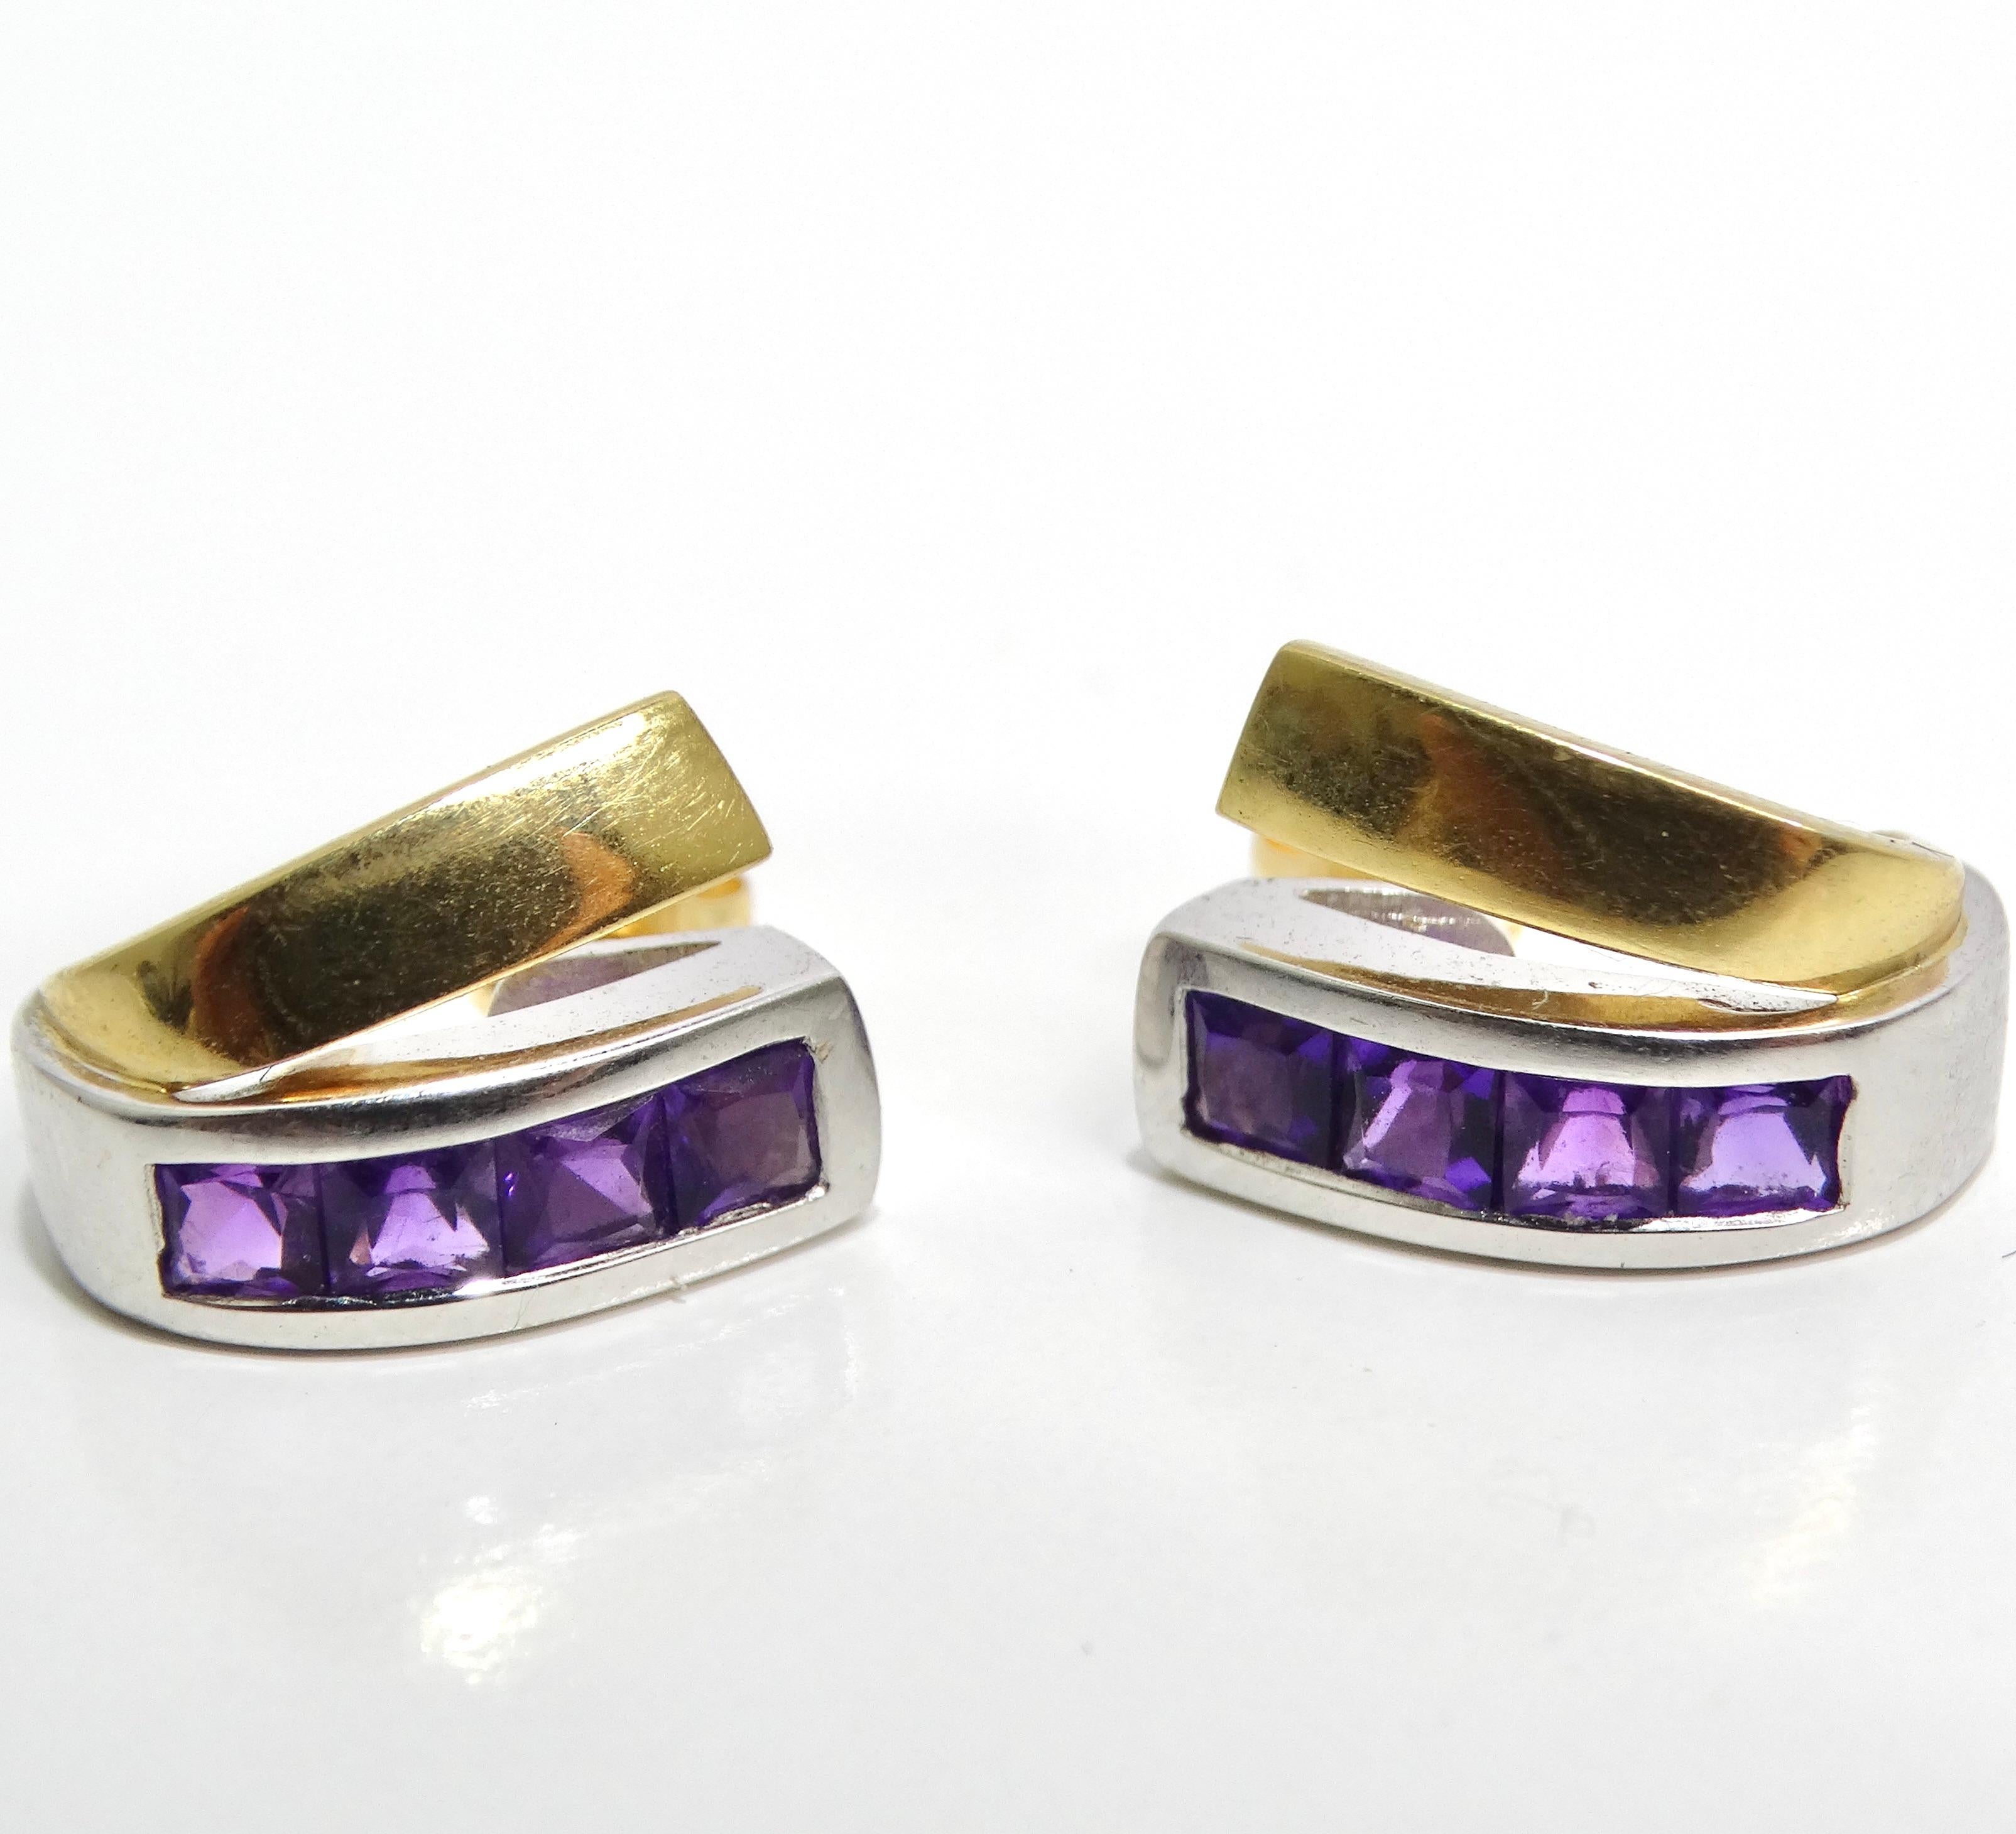 Introducing a timeless pair of earrings from the 1990s, the 18K Two Tone Gold Amethyst Stud Earrings. These classic huggie stud earrings are crafted with meticulous attention to detail, featuring a combination of two-tone yellow and white gold for a